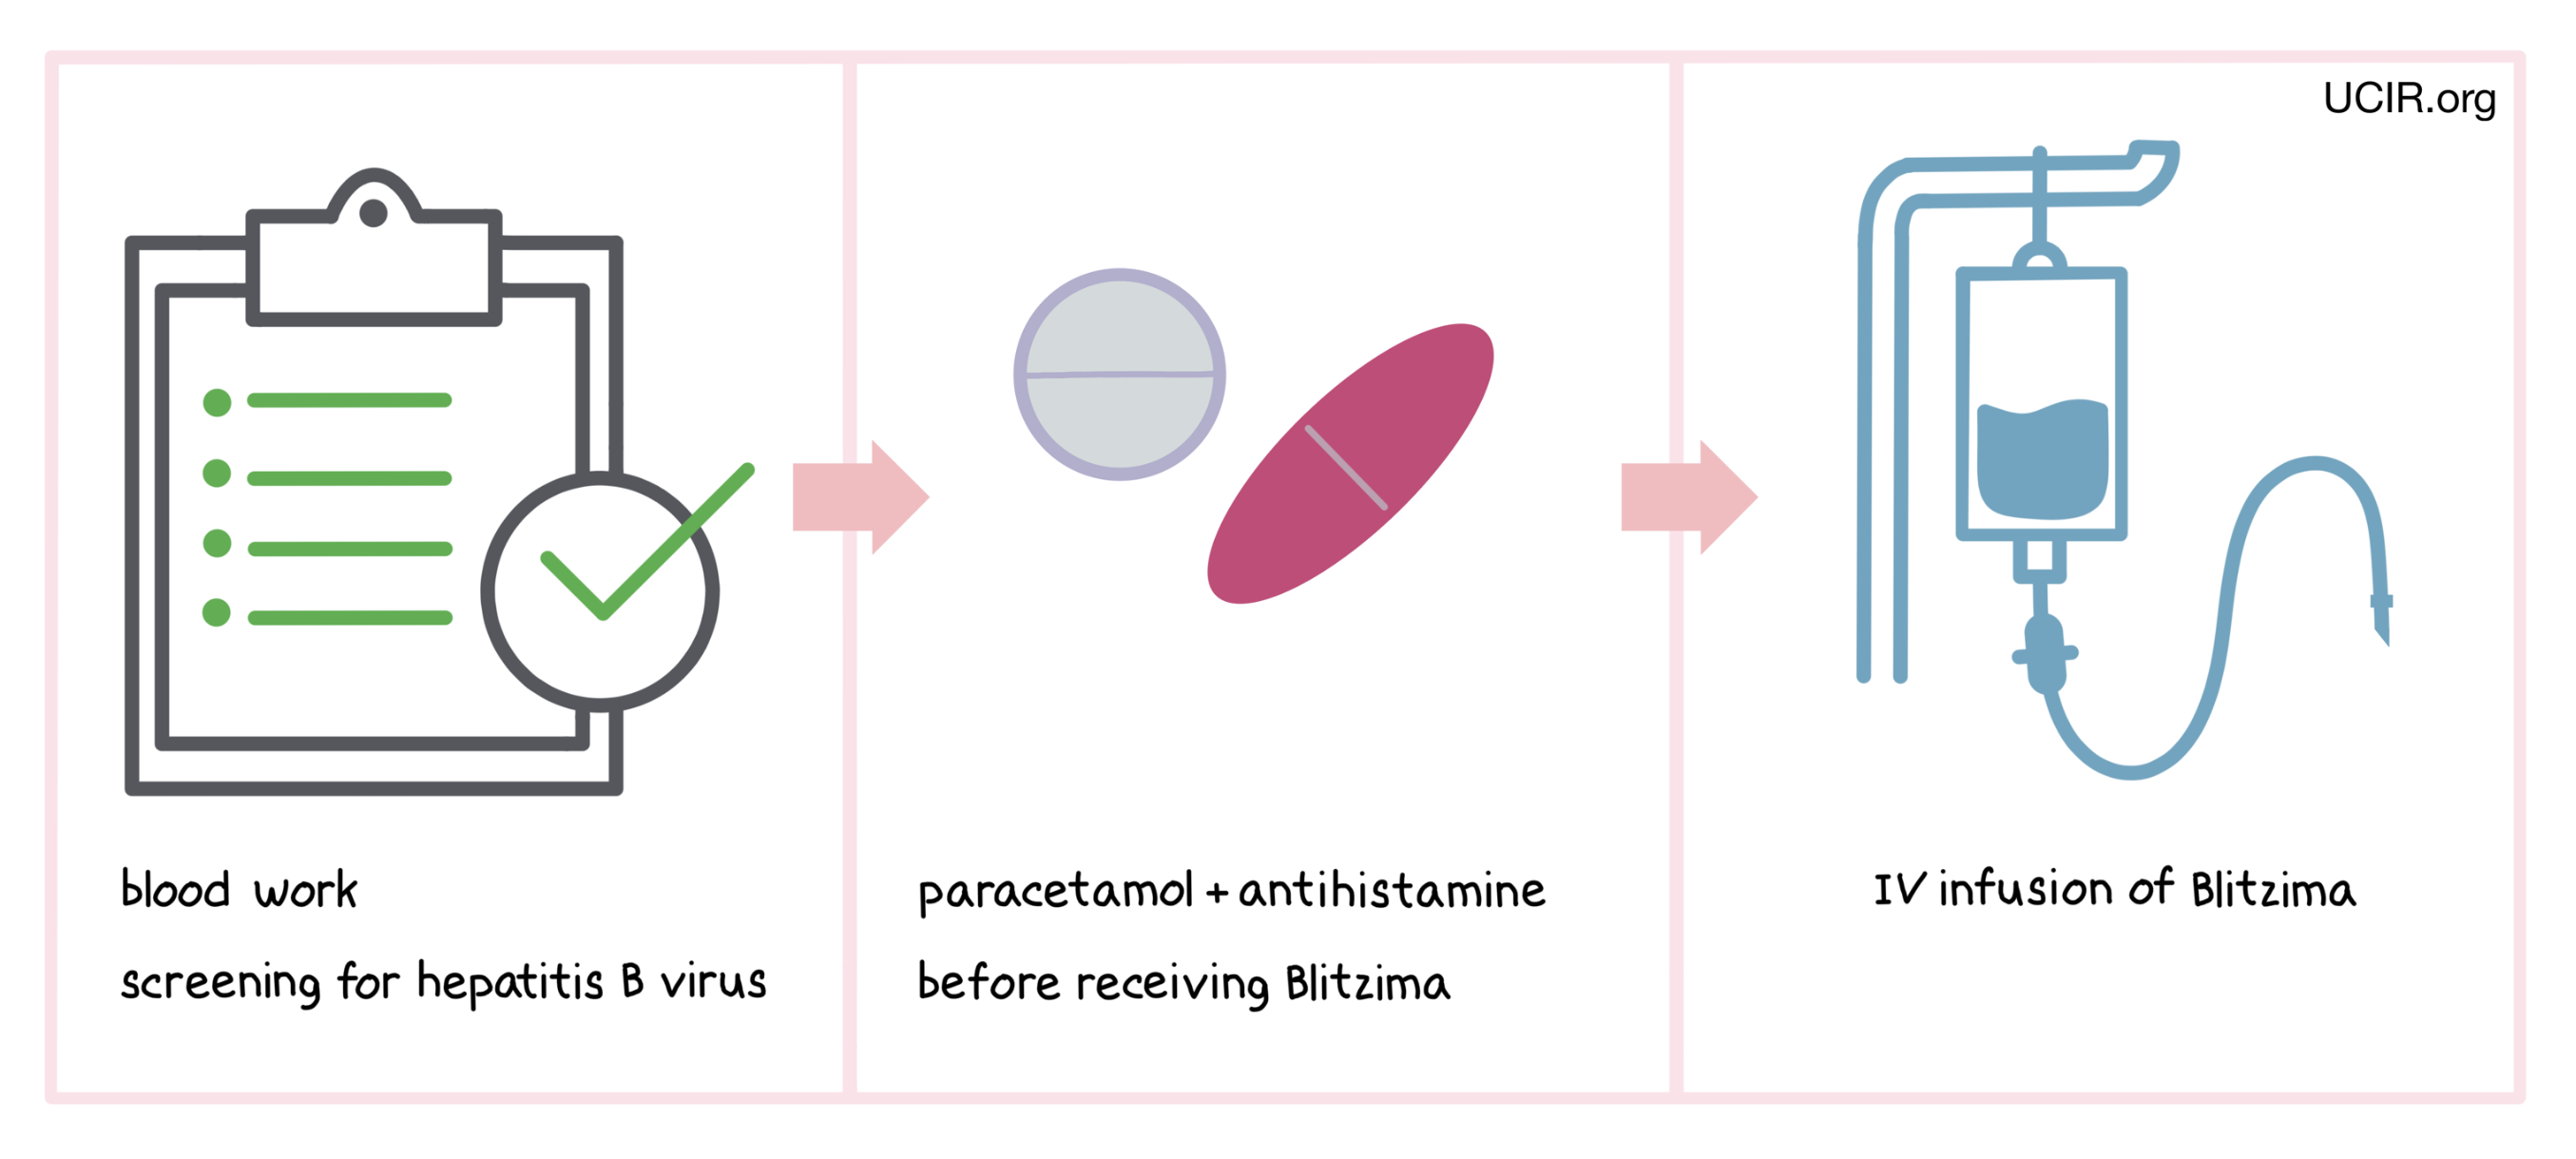 Illustration showing how Blitzima is administered to patients